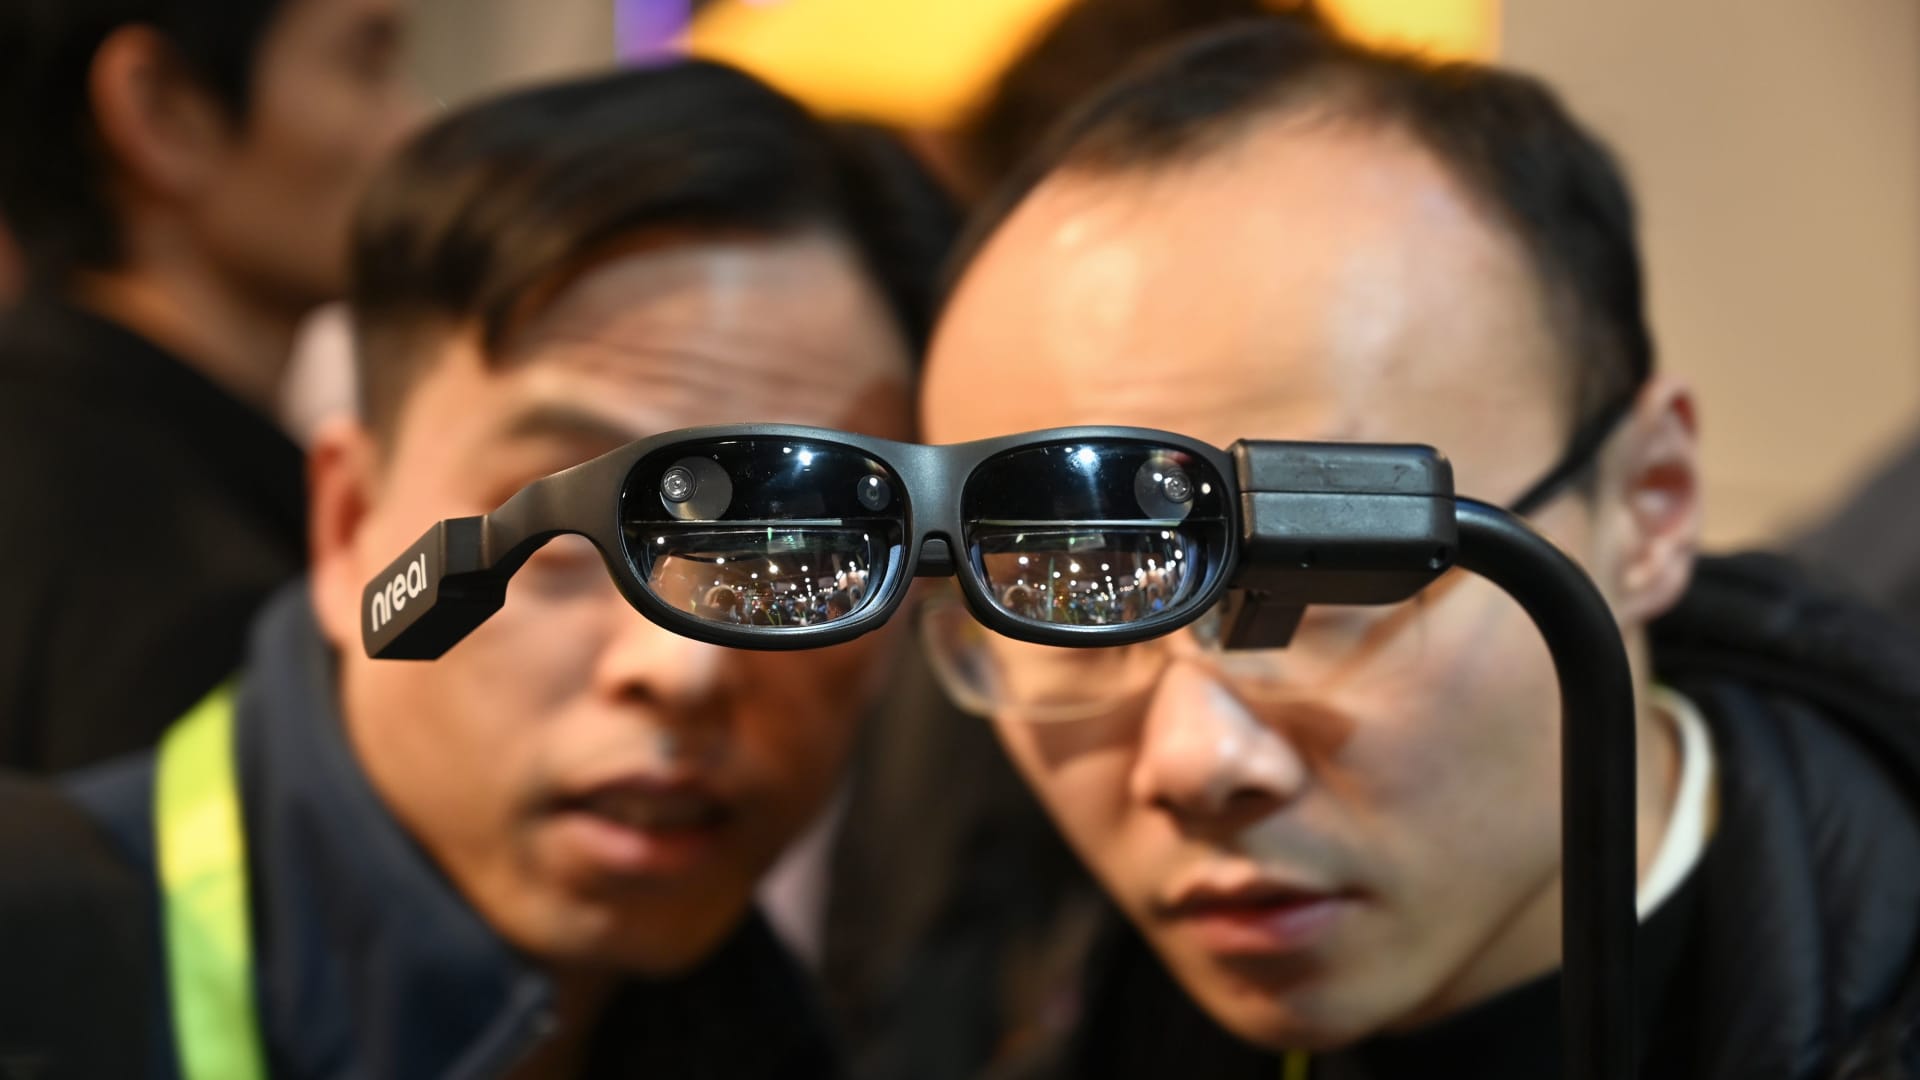 Chinese start-up Nreal is launching its augmented reality glasses in the UK this spring